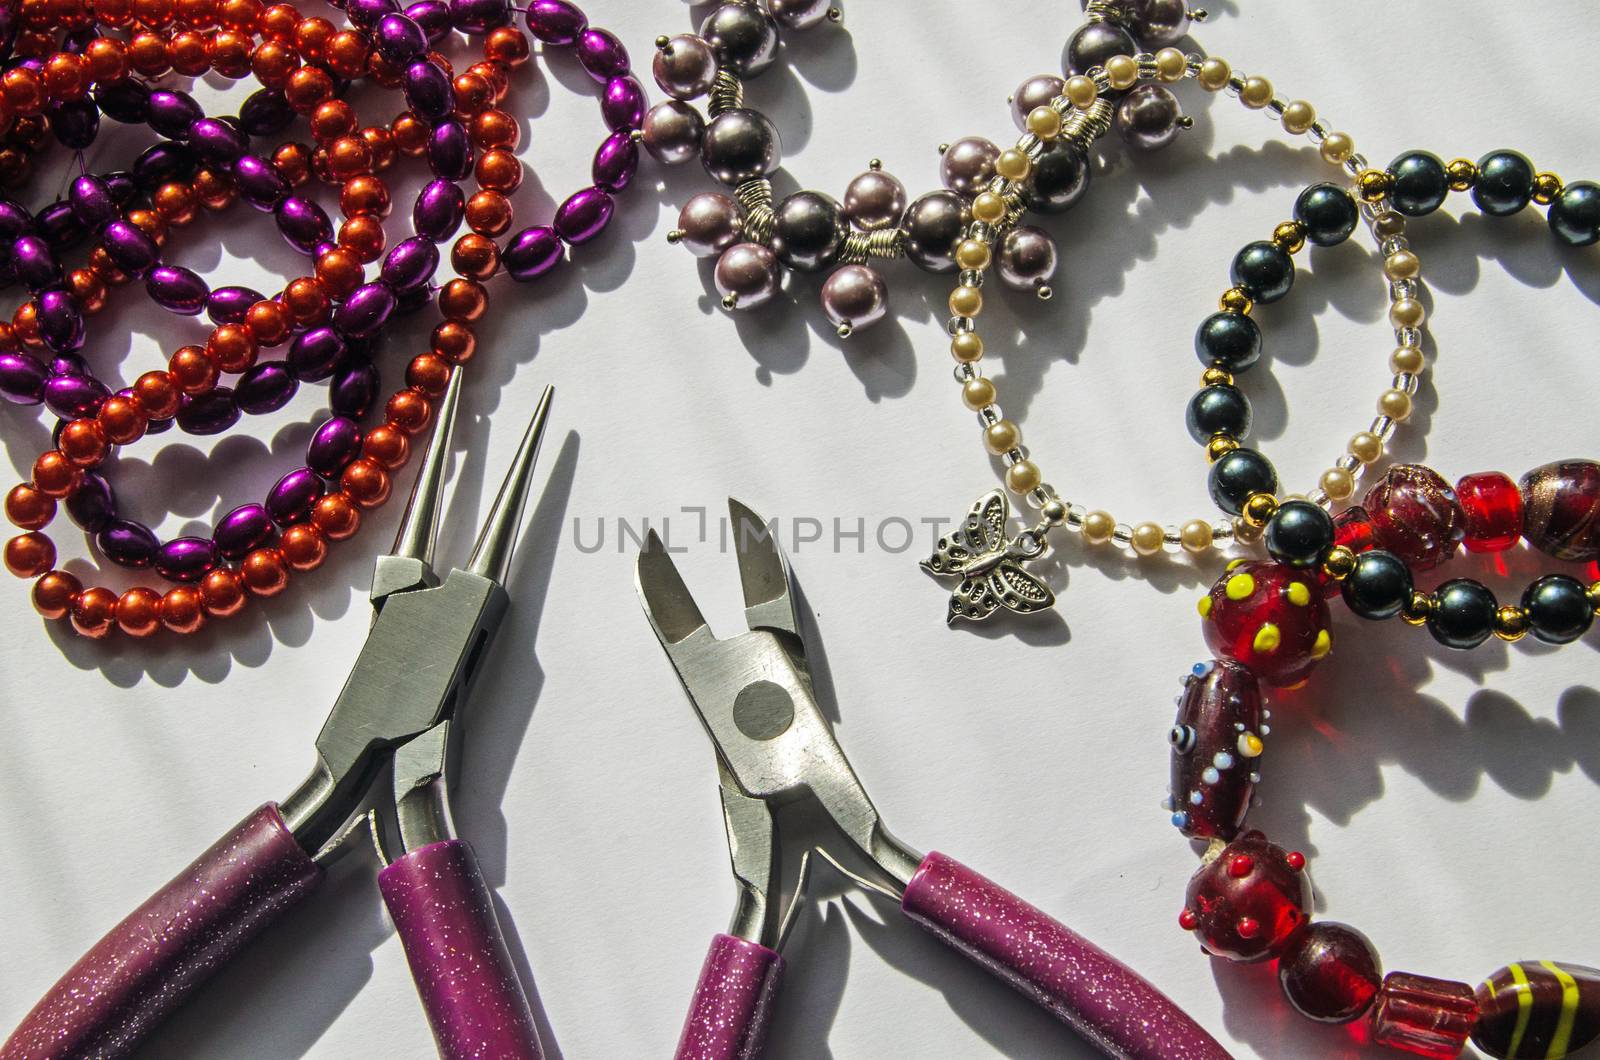 A selection of beads and tools used to make bracelets with the finished products shown too.